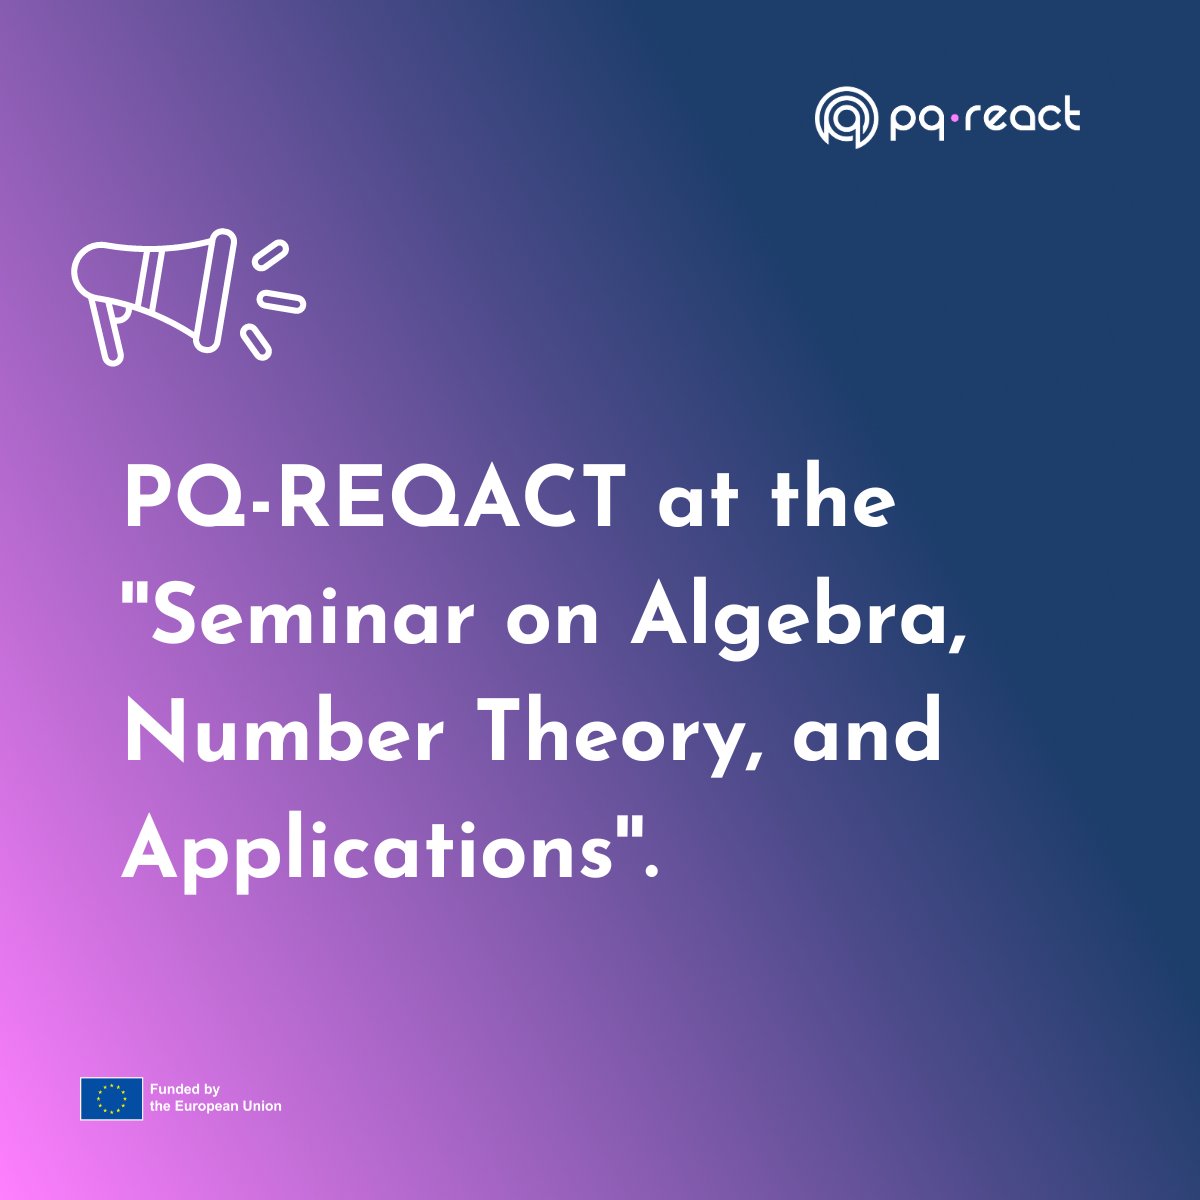 📣On May 7th, @IndraCompany will participate in the ''Seminar on Algebra, Number Theory, and Applications'' at Aalto University, Helsinki! 👨‍💻 Indra will present an “Overview and extension of root-based attacks against PLWE instances”, spreading the word for @PQREACT! #pqreact